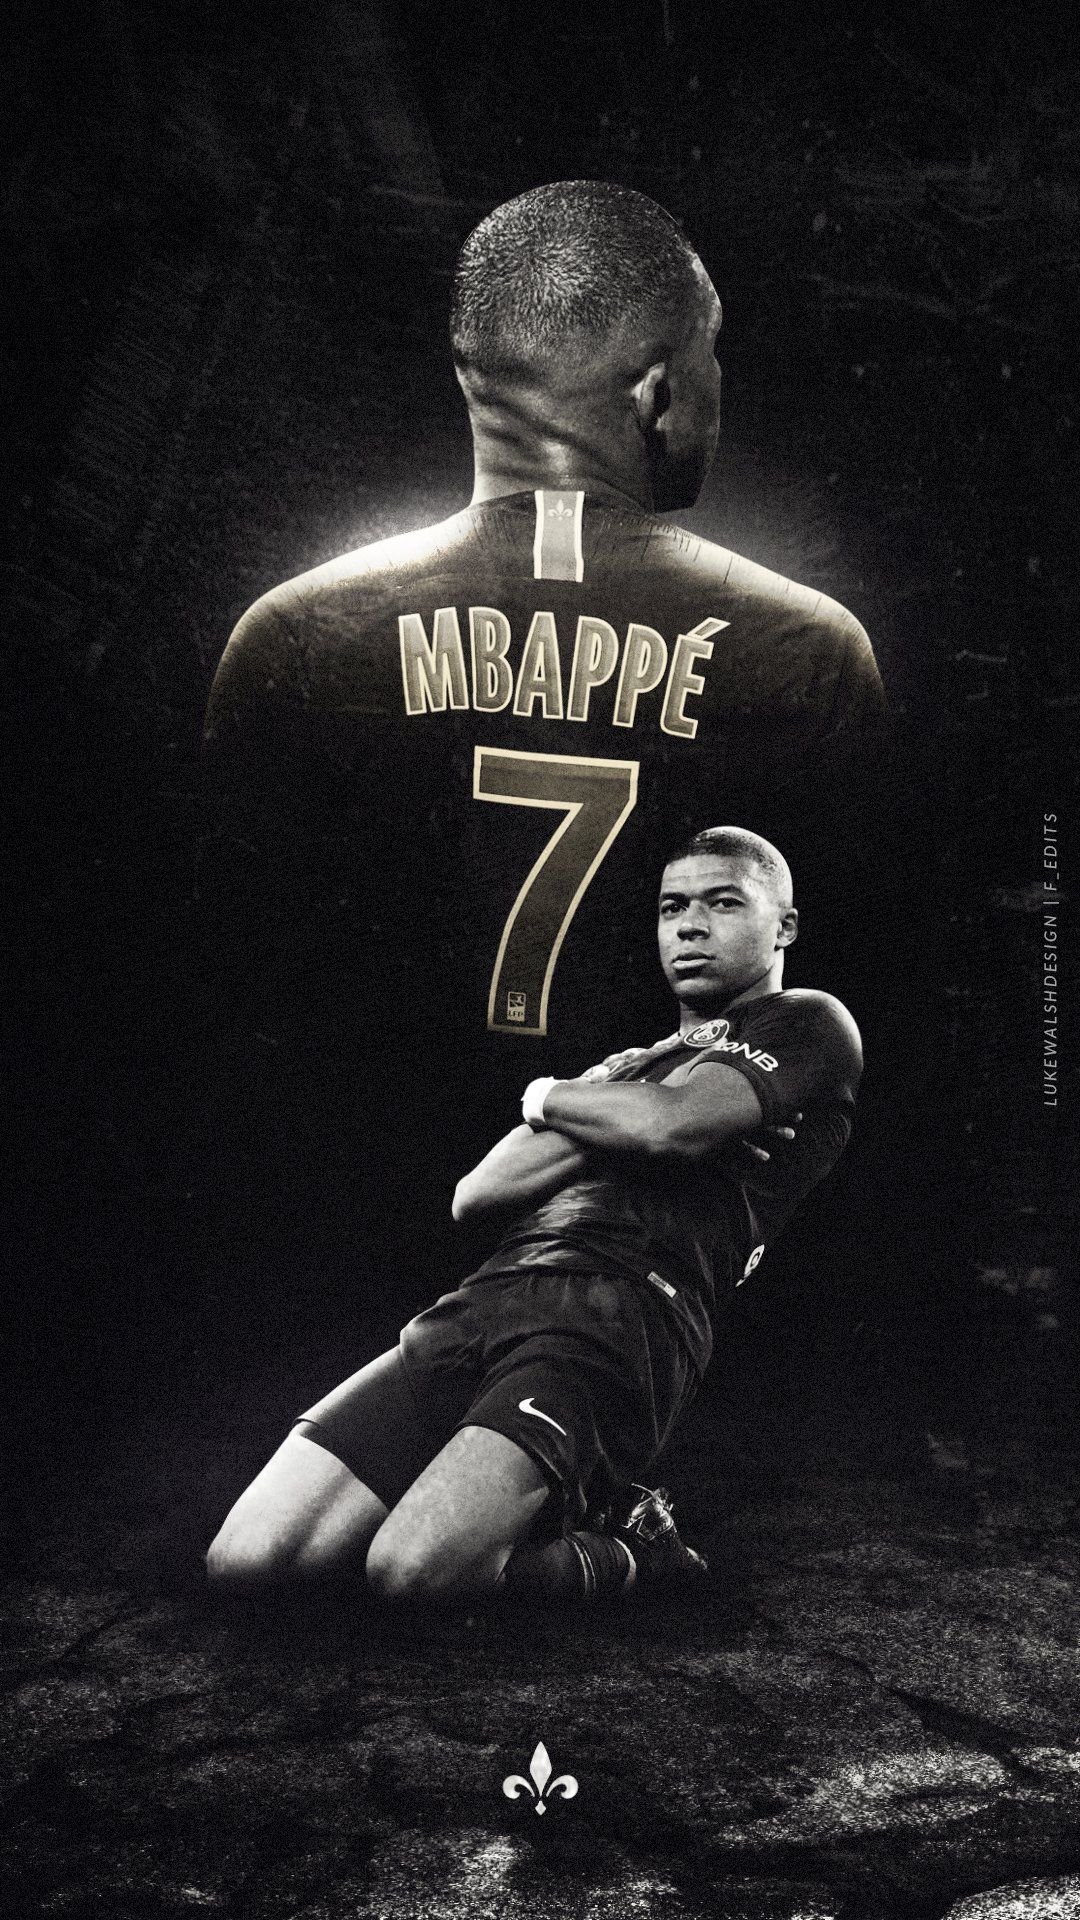 Fredrik Mbappe wallpaper [Collab with #PSG